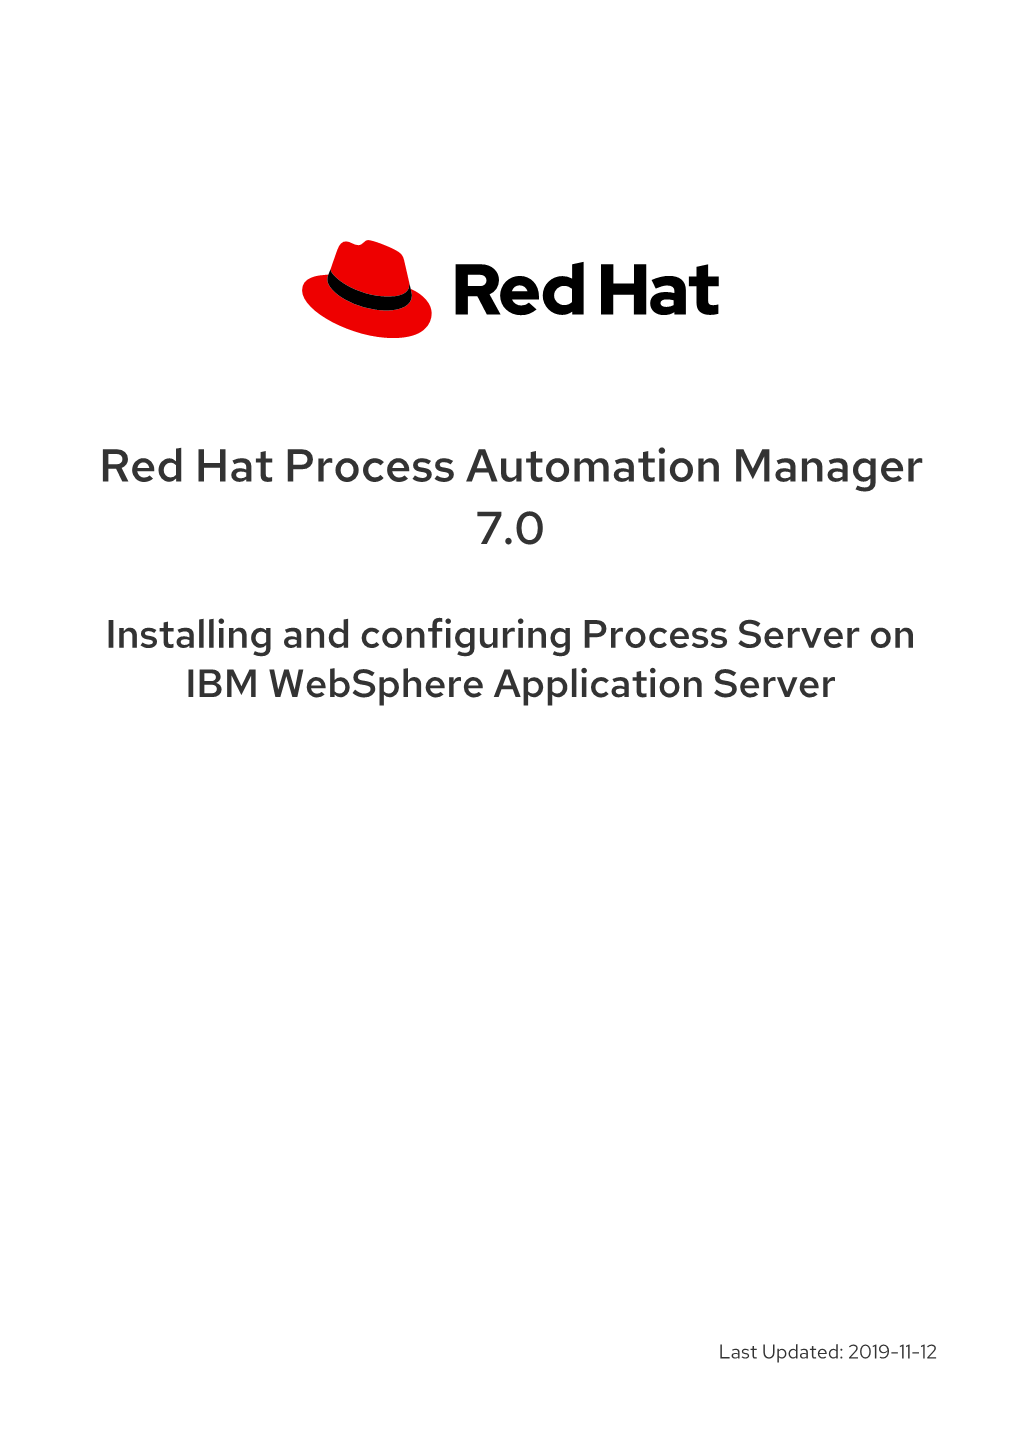 Red Hat Process Automation Manager 7.0 Installing and Configuring Process Server on IBM Websphere Application Server